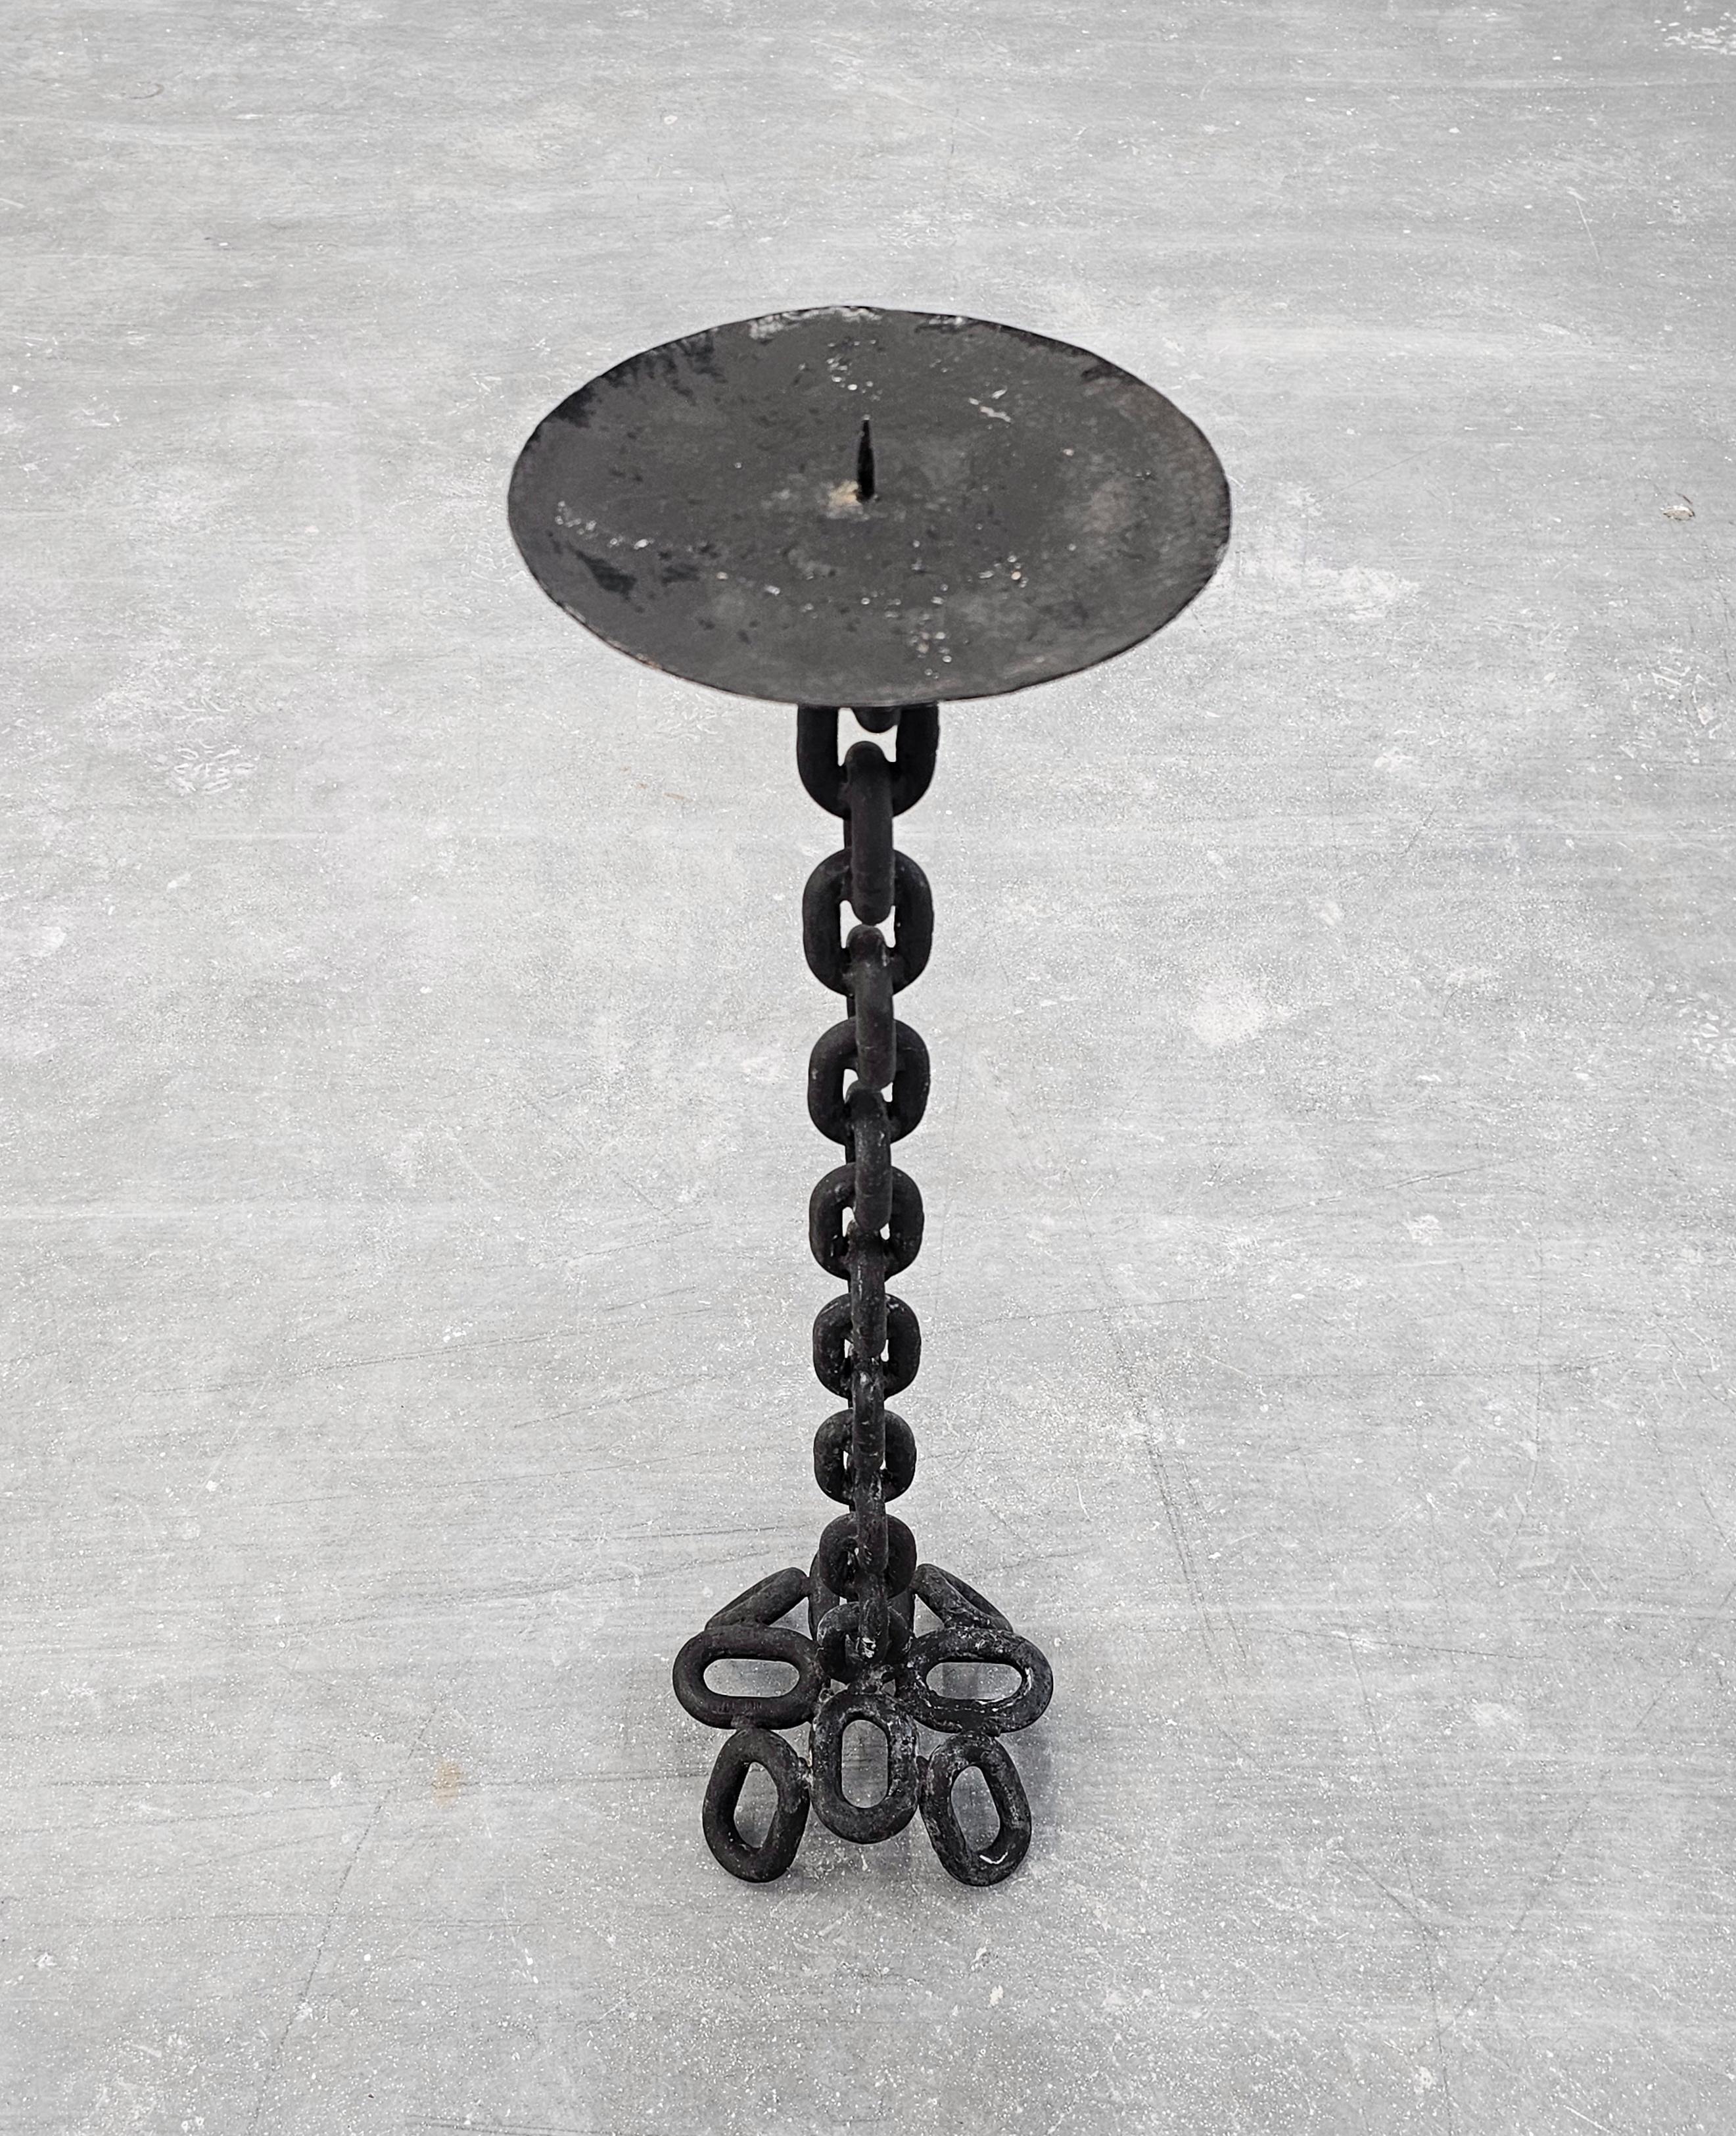 In this listing you will find an extra large Brutalist candlestick holder made of iron chain. It features a large holder of 20cm or 8 inches in diameter that can hold a very large candle. Made in France in 1960s.

Very good vintage condition with